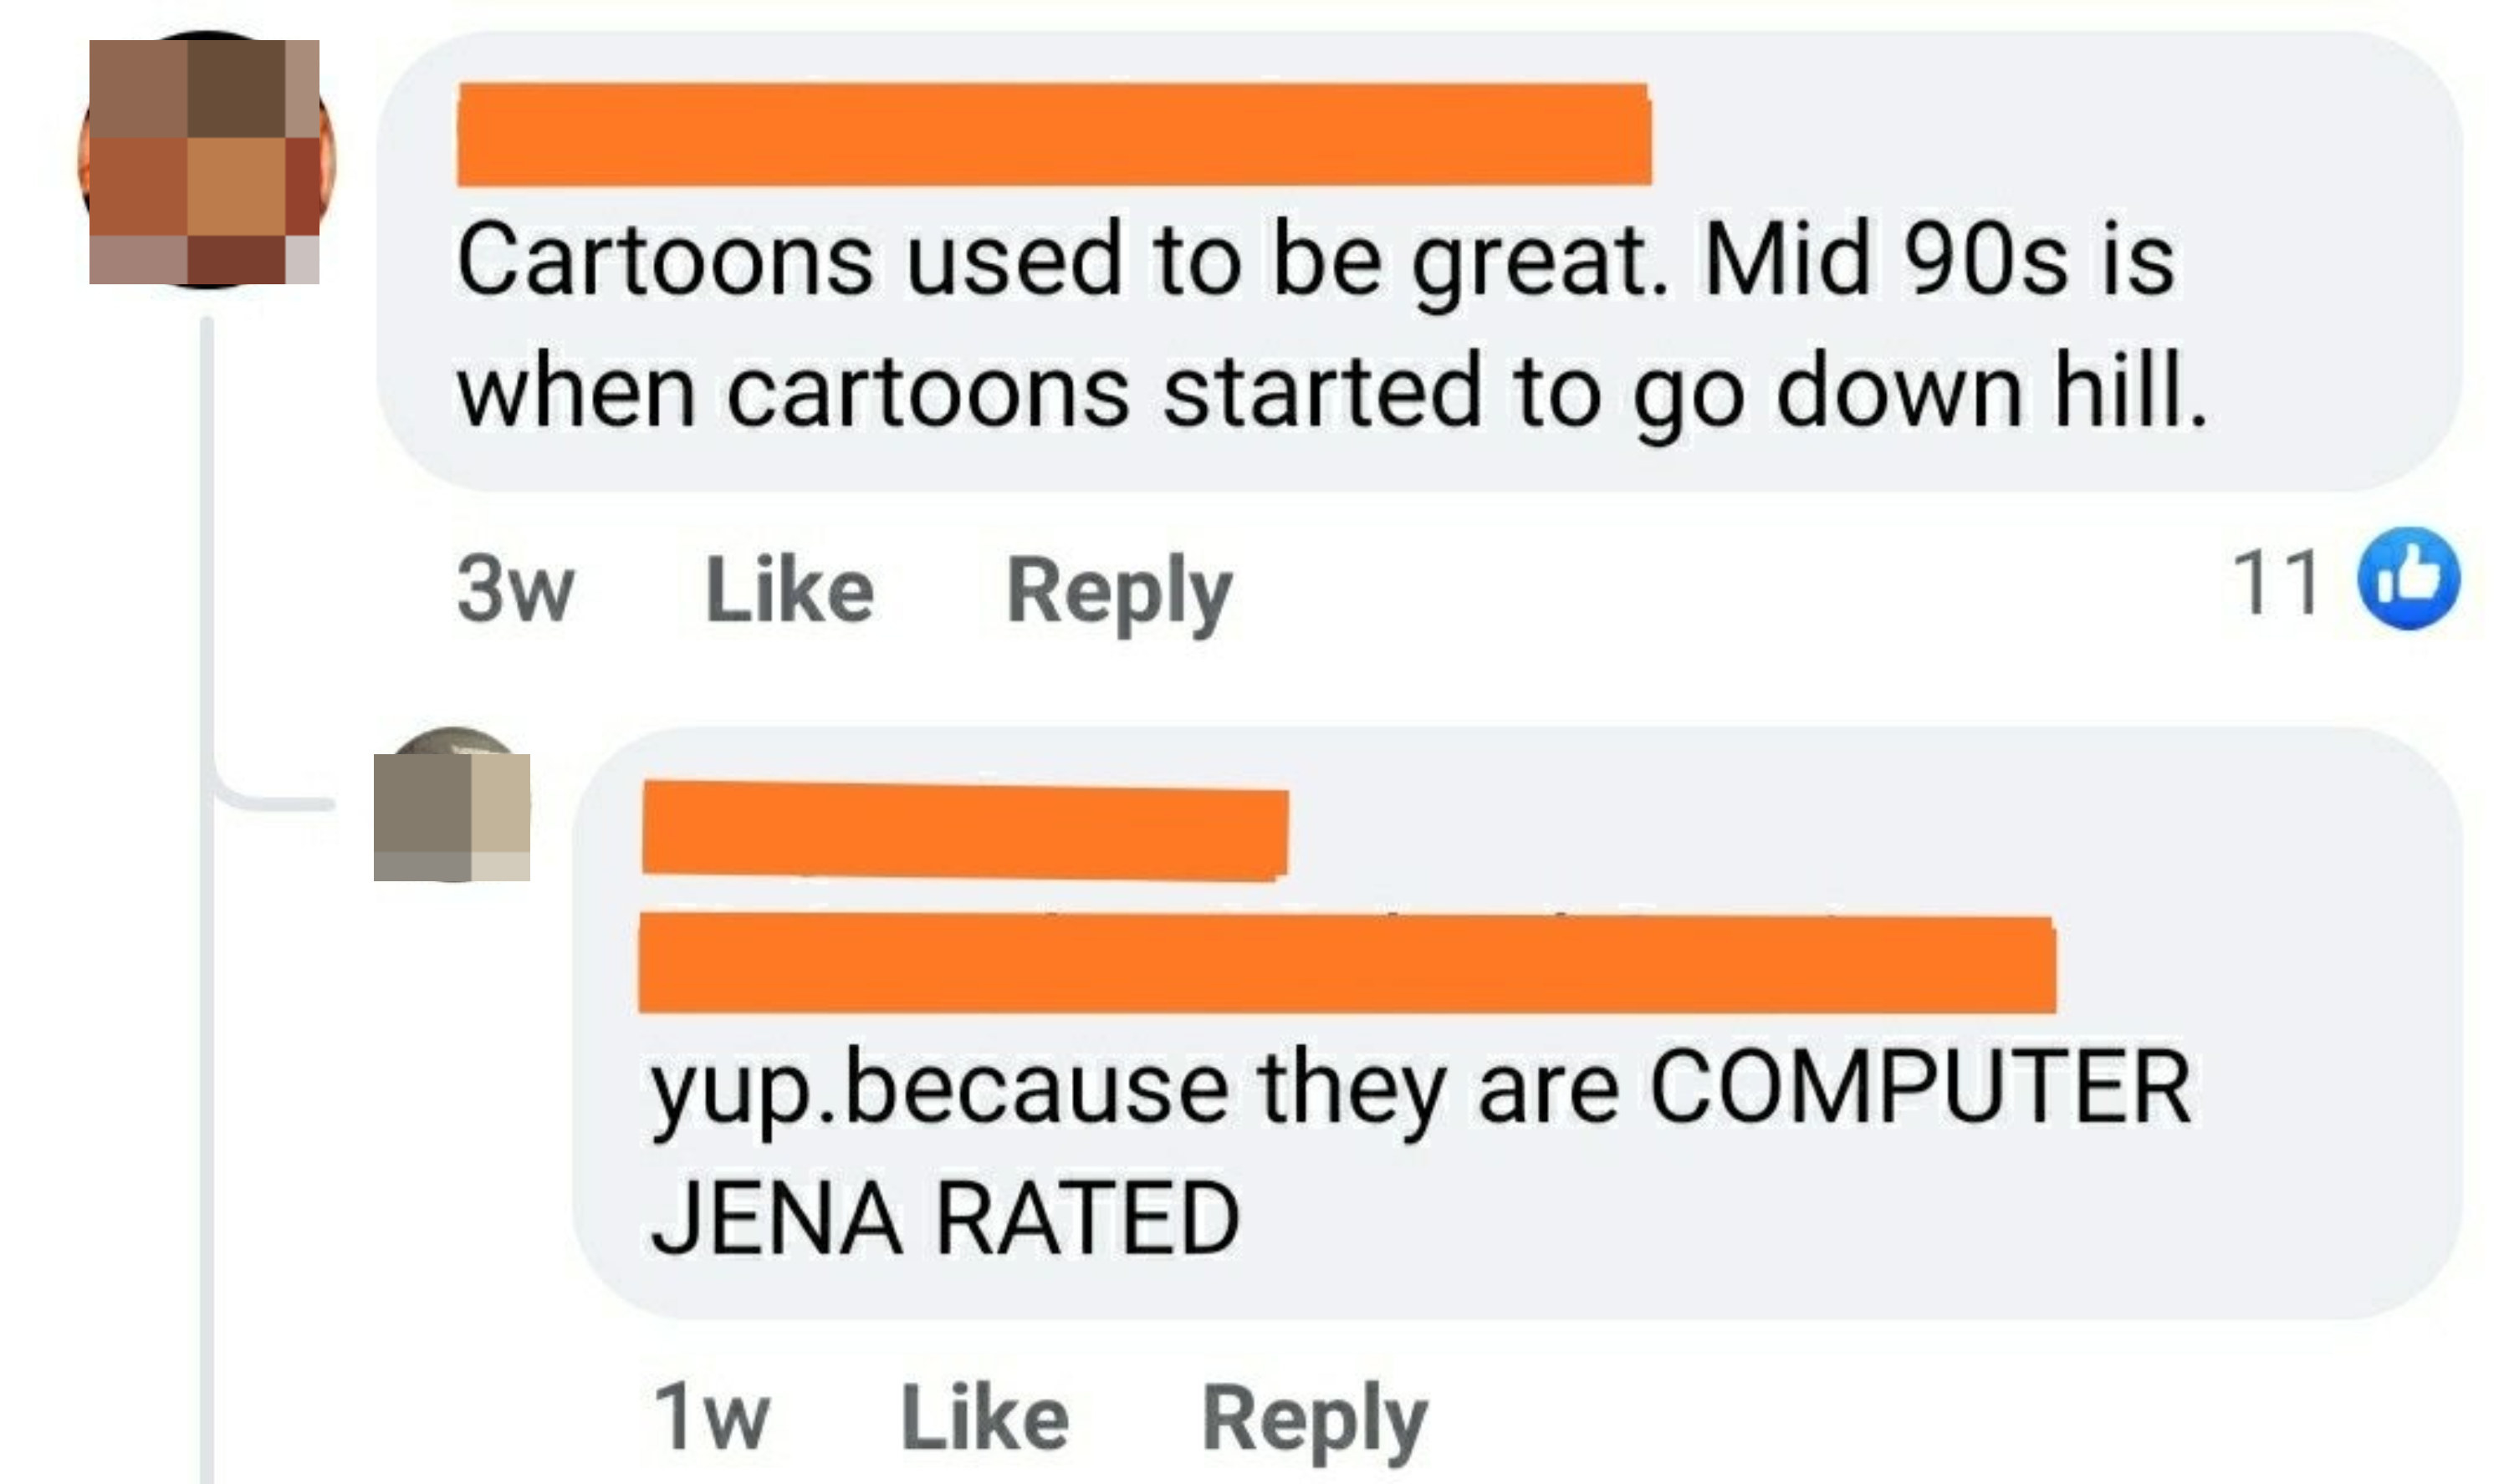 person who spells computer generated as jena rated